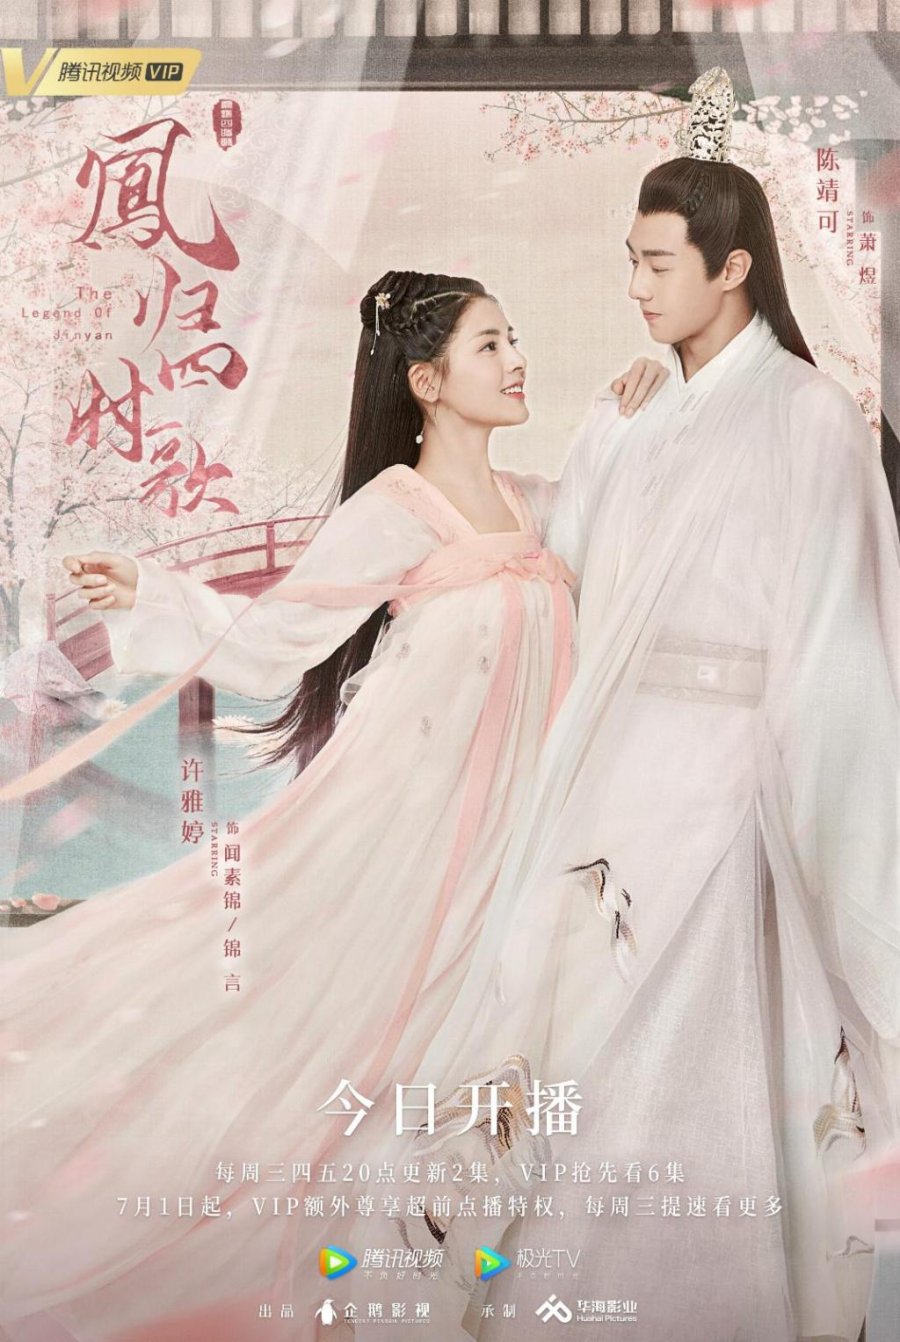 image poster from imdb - ​The Legend of Jin Yan (2020)